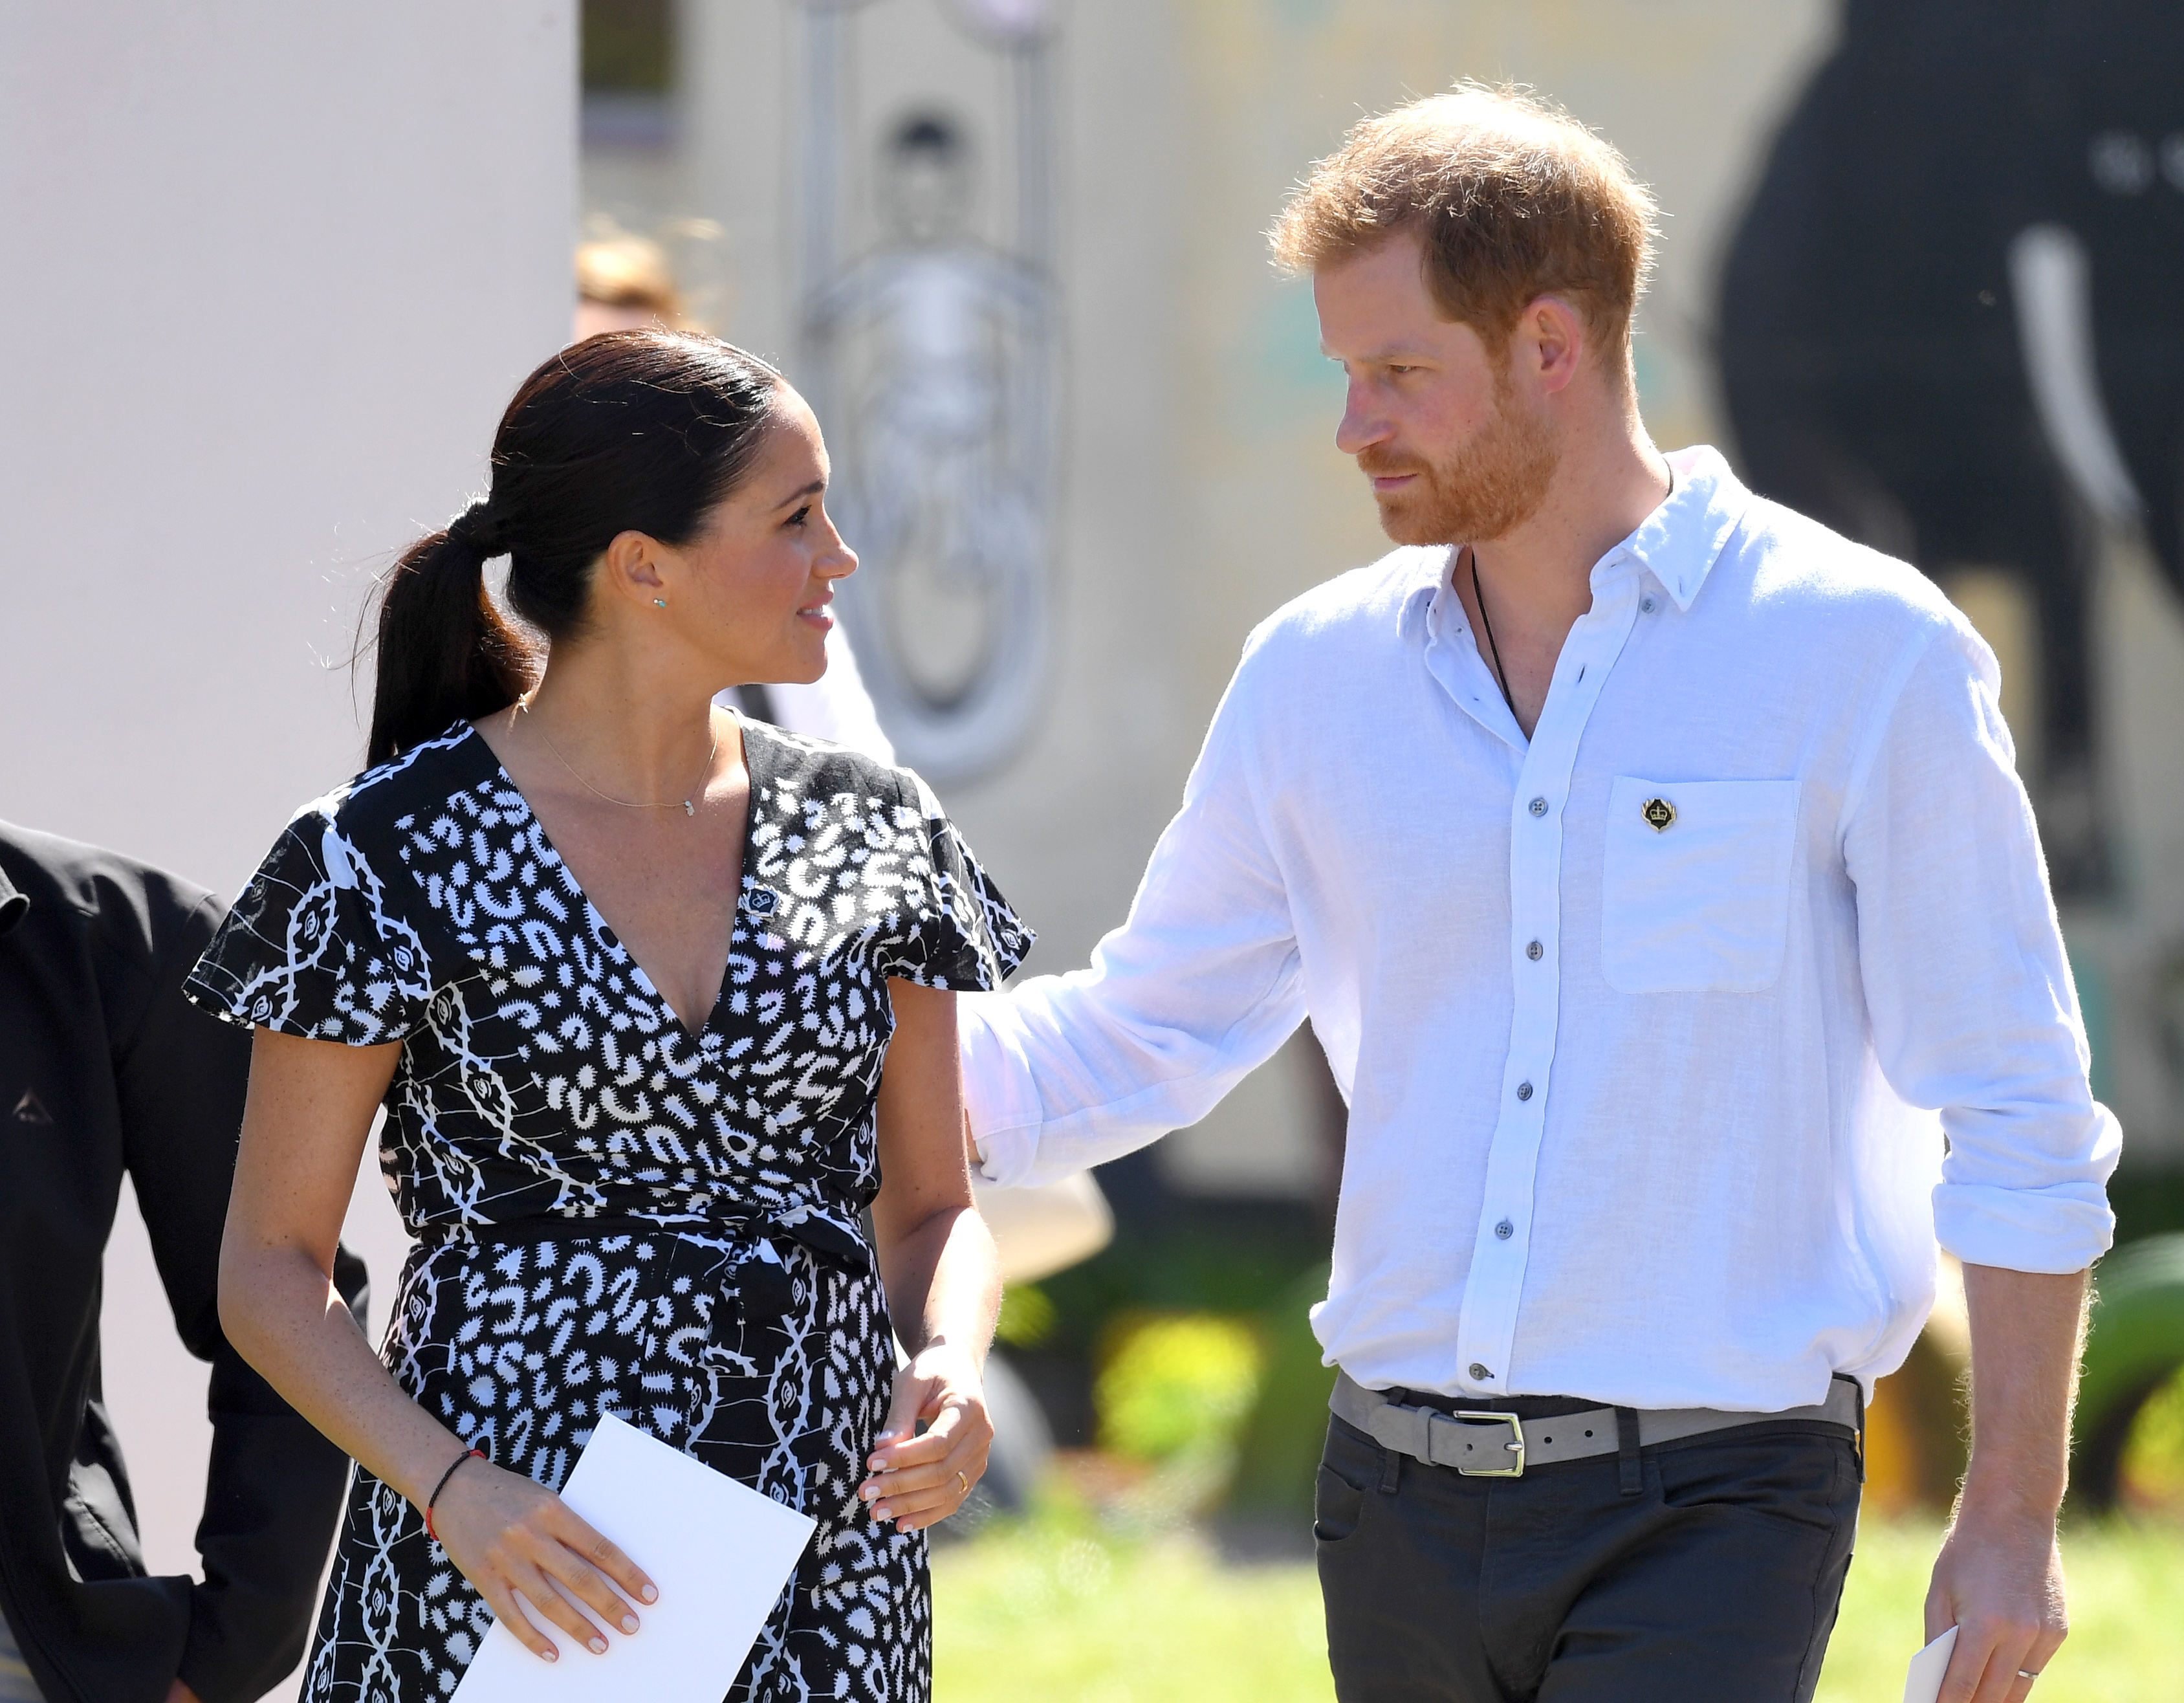 Prince Harry, Duke of Sussex and Meghan, Duchess of Sussex visit the Nyanga Township during their royal tour of South Africa on September 23, 2019 in Cape Town, South Africa. On Tuesday, Oct. 1, 2019, Prince Harry announced Markle is suing a U.K. tabloid over its coverage. (Karwai Tang—WireImage)